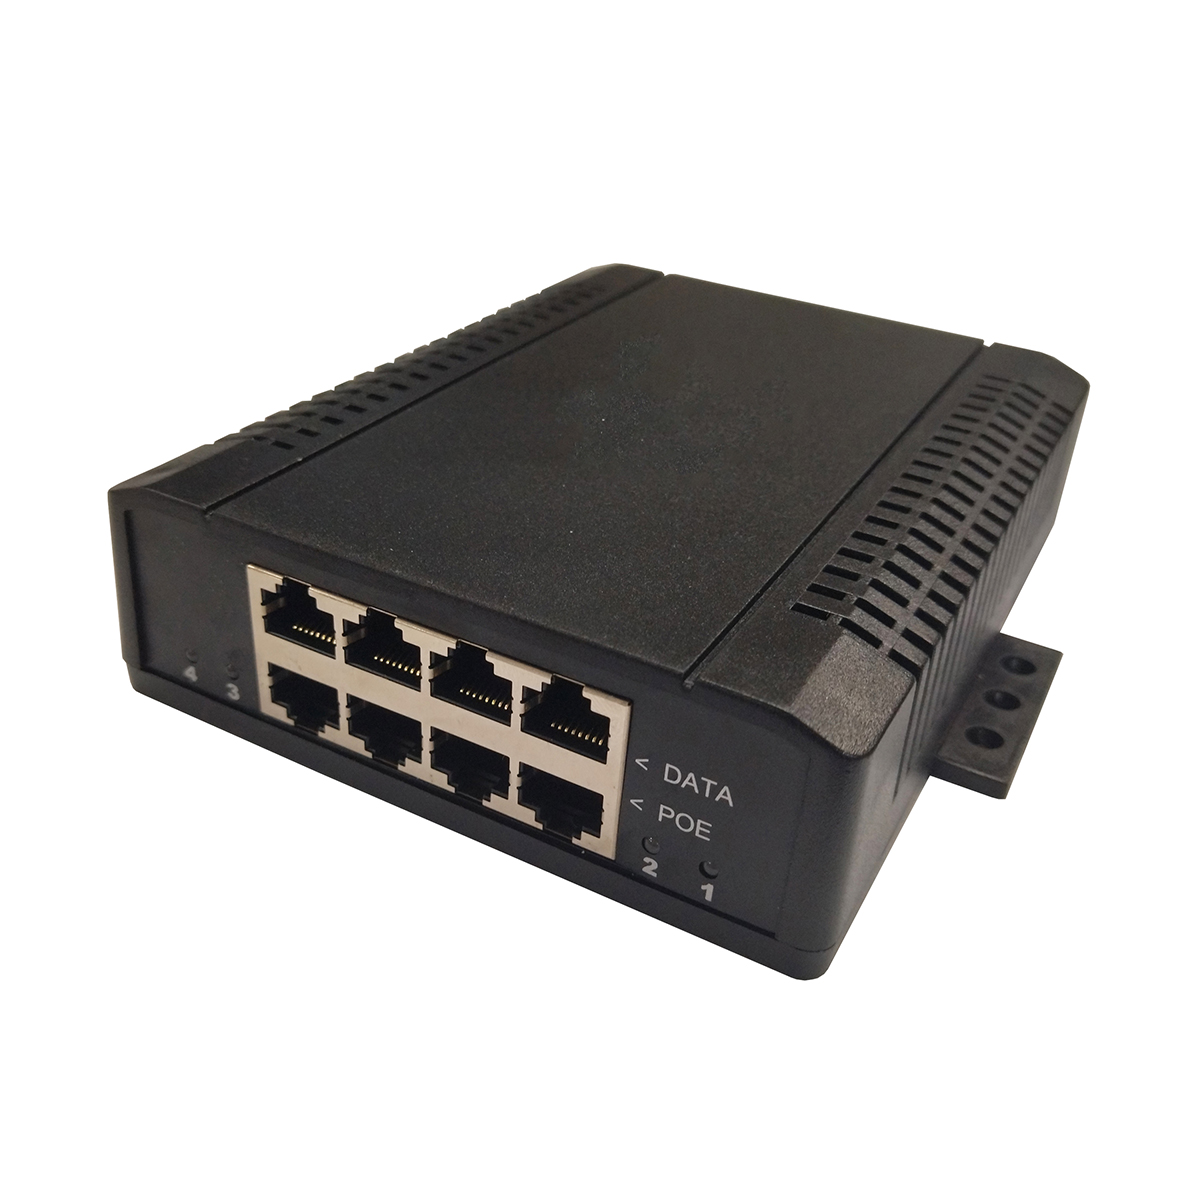 4 port AC/DC Gigabit PoE Injector with 48V 0.35A per port and surge protection, 802.3af compliant, MIT-4X48G-B1NN